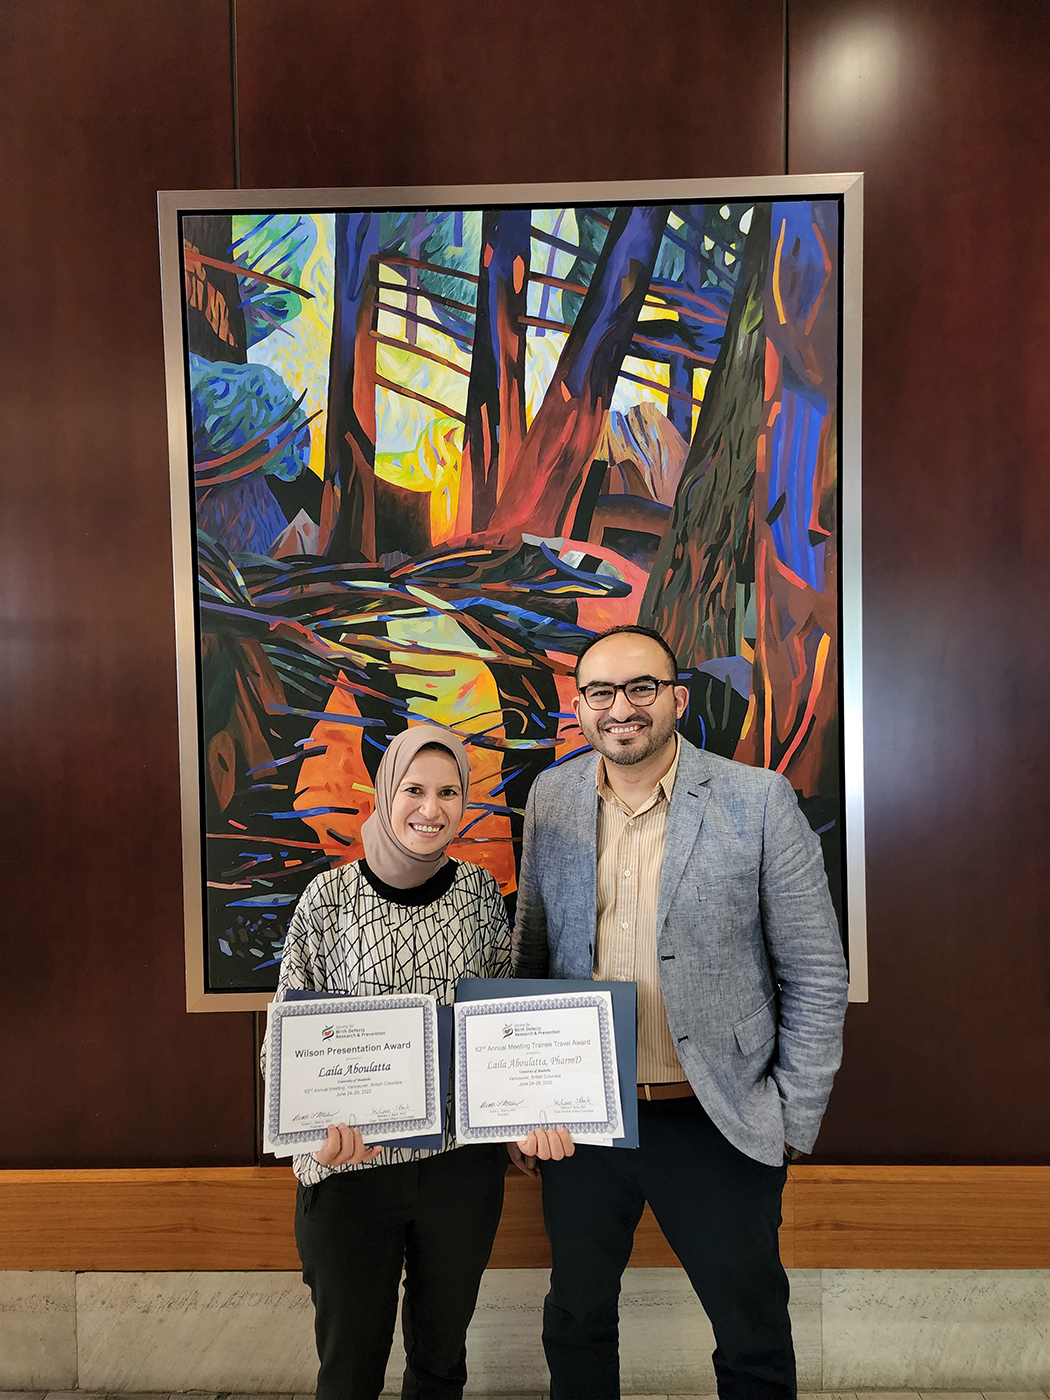 Laila Aboulatta and Dr. Sherif Eltonsy pose for a photo. Laila holds two certificates.